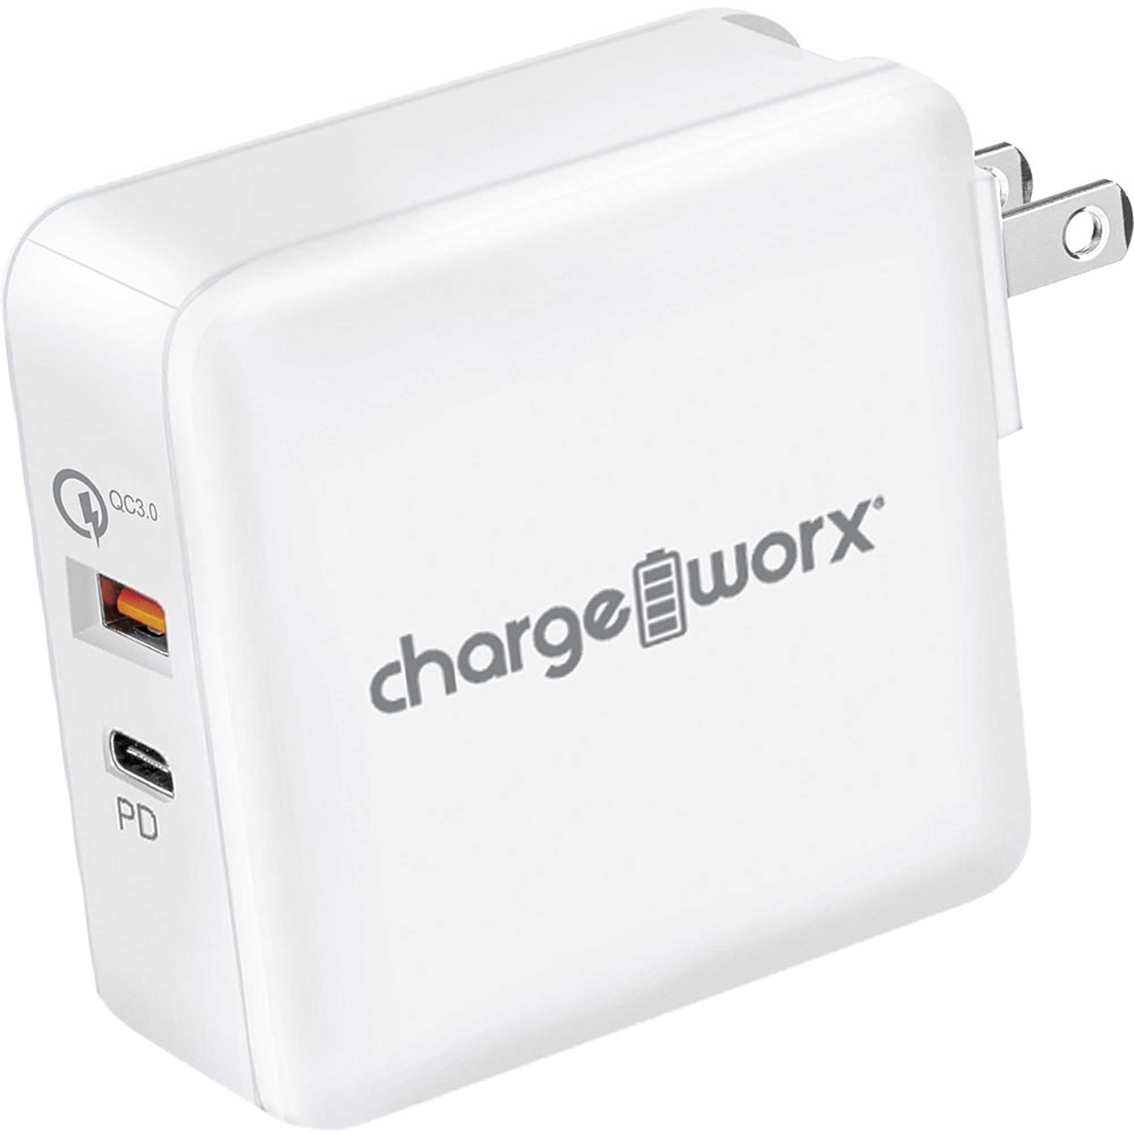 Chargeworx Power Delivery Usb-c Wall Charger | Cell Phone Batteries ...